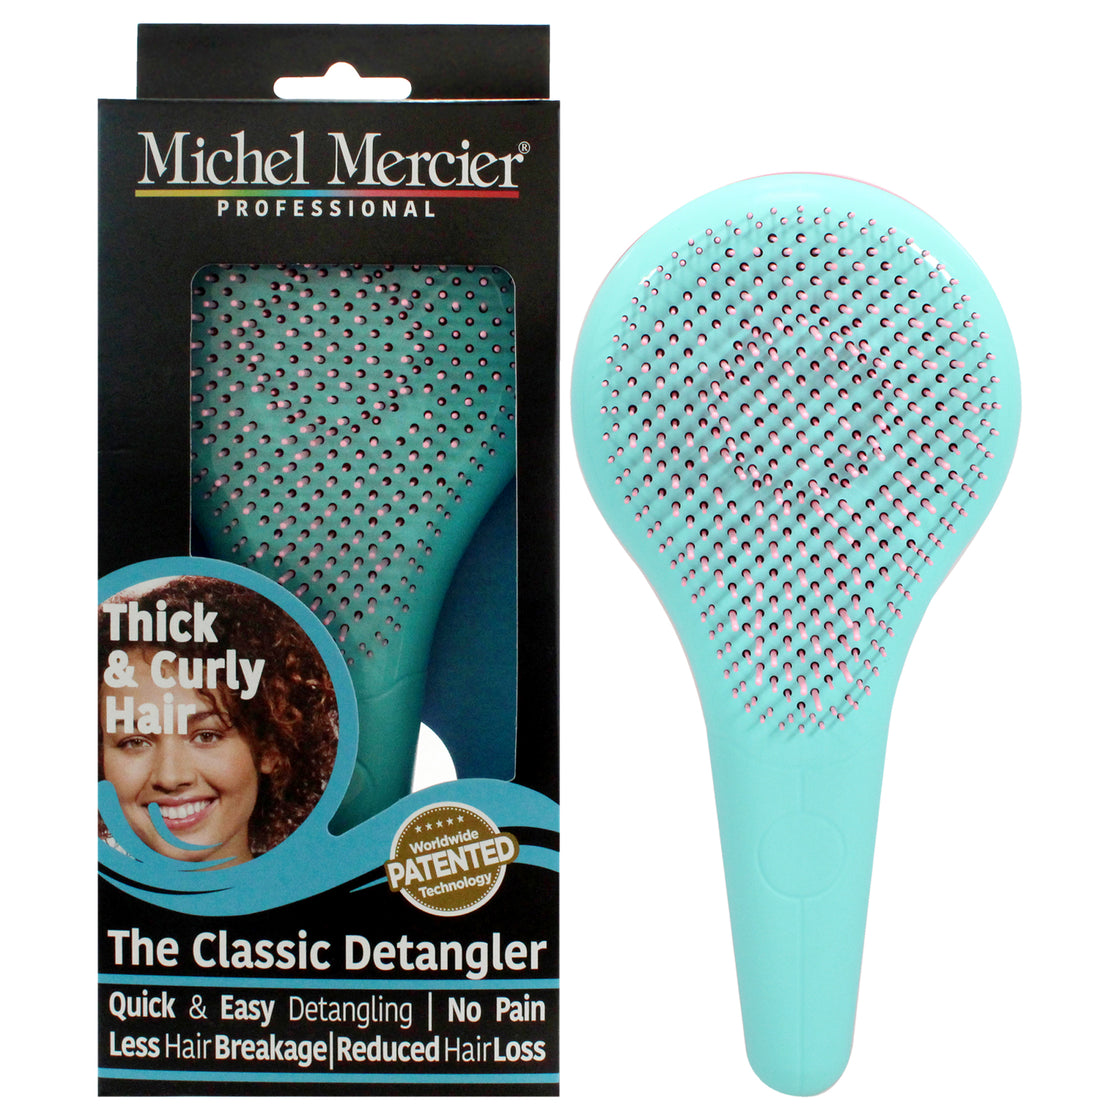 The Classic Detangler Thick and Curly Hair - Pink-Turquoise by Michel Mercier for Unisex - 1 Pc Hair Brush